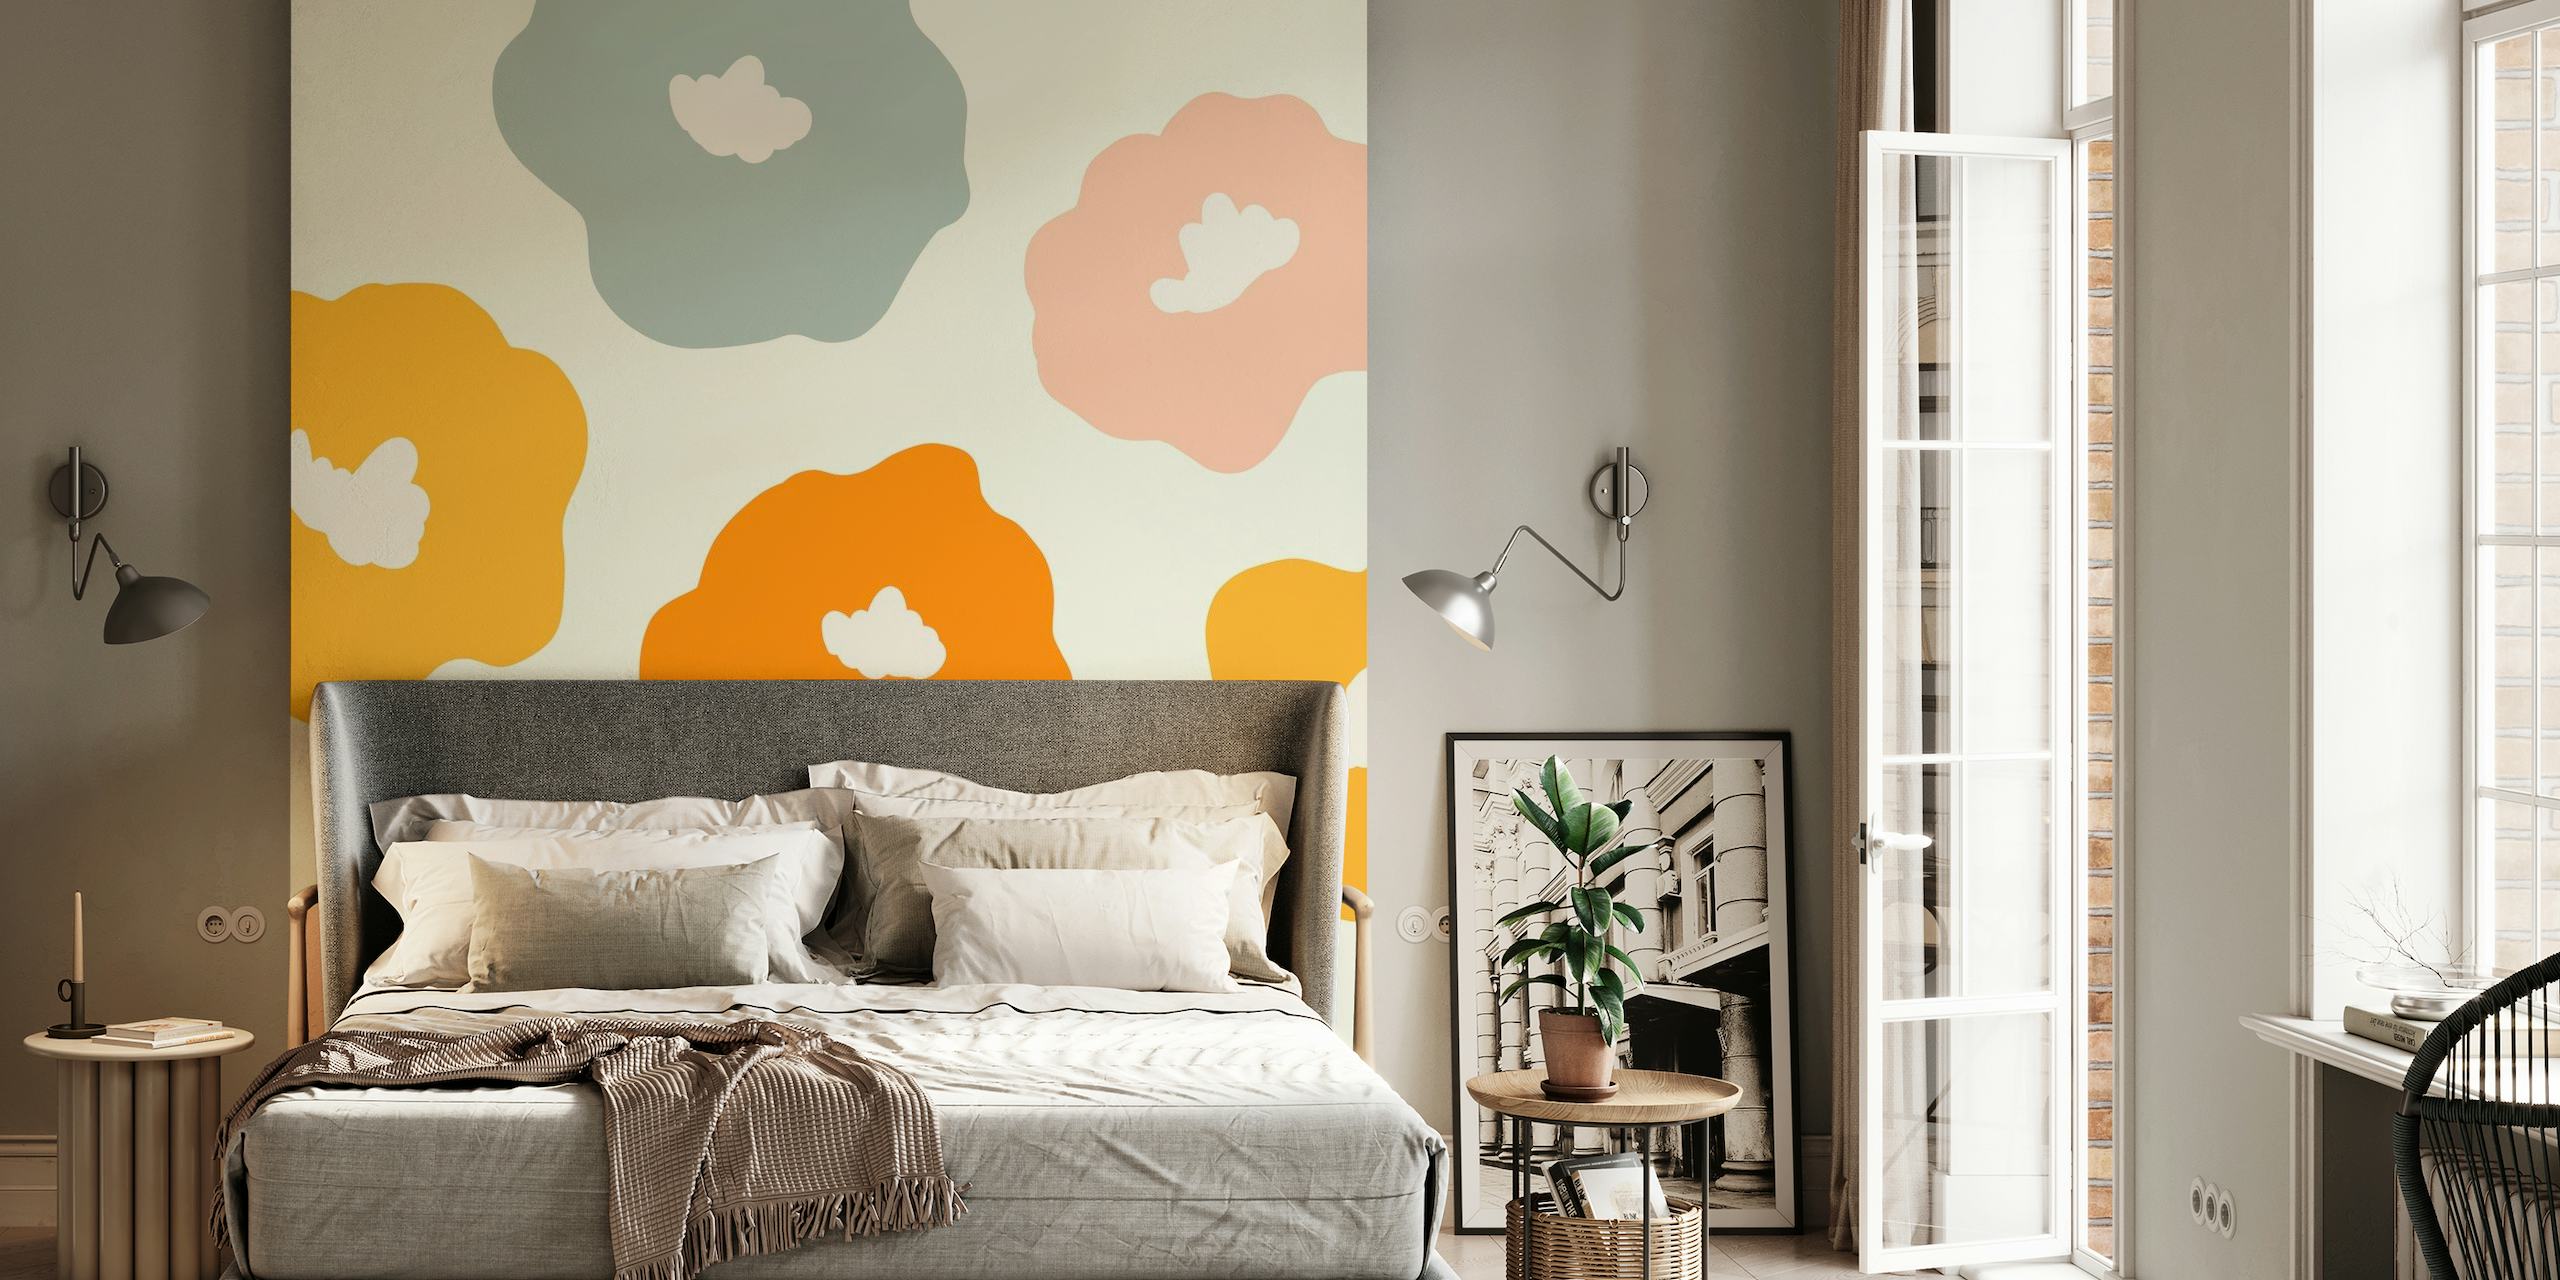 Colorful retro-style floral pattern on a wall mural for interior design